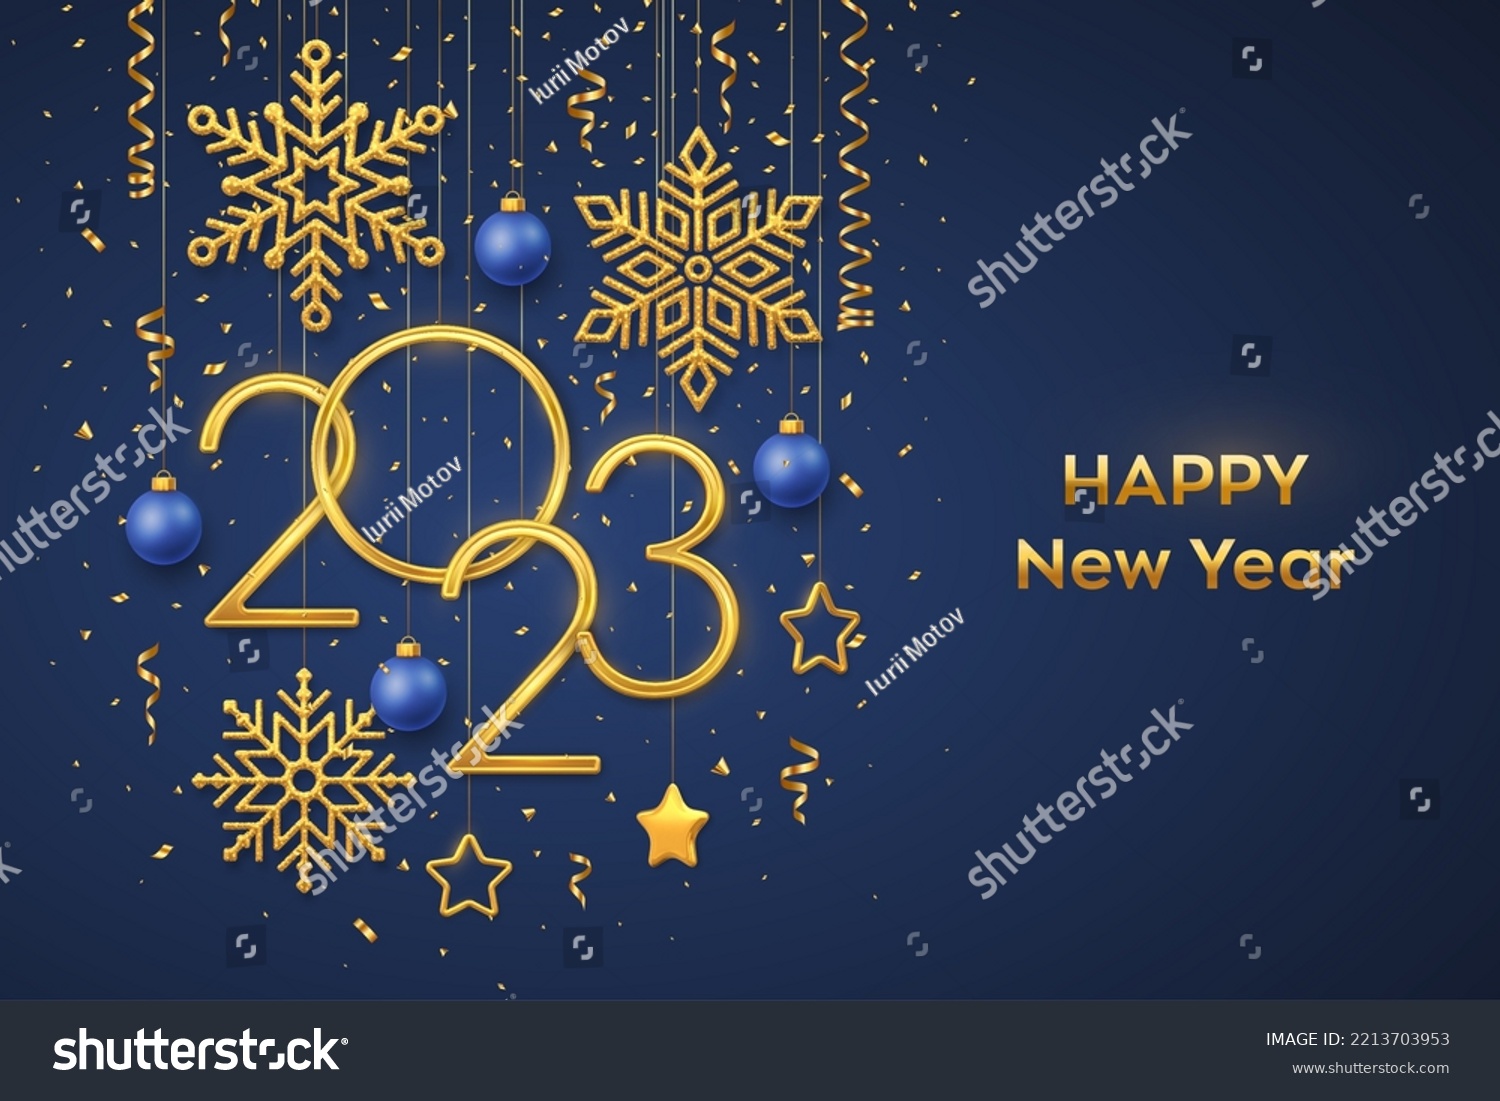 Happy New 2023 Year. Hanging Golden metallic numbers 2023 with shining snowflakes, 3D metallic stars, balls and confetti on blue background. New Year greeting card or banner template. Vector. #2213703953